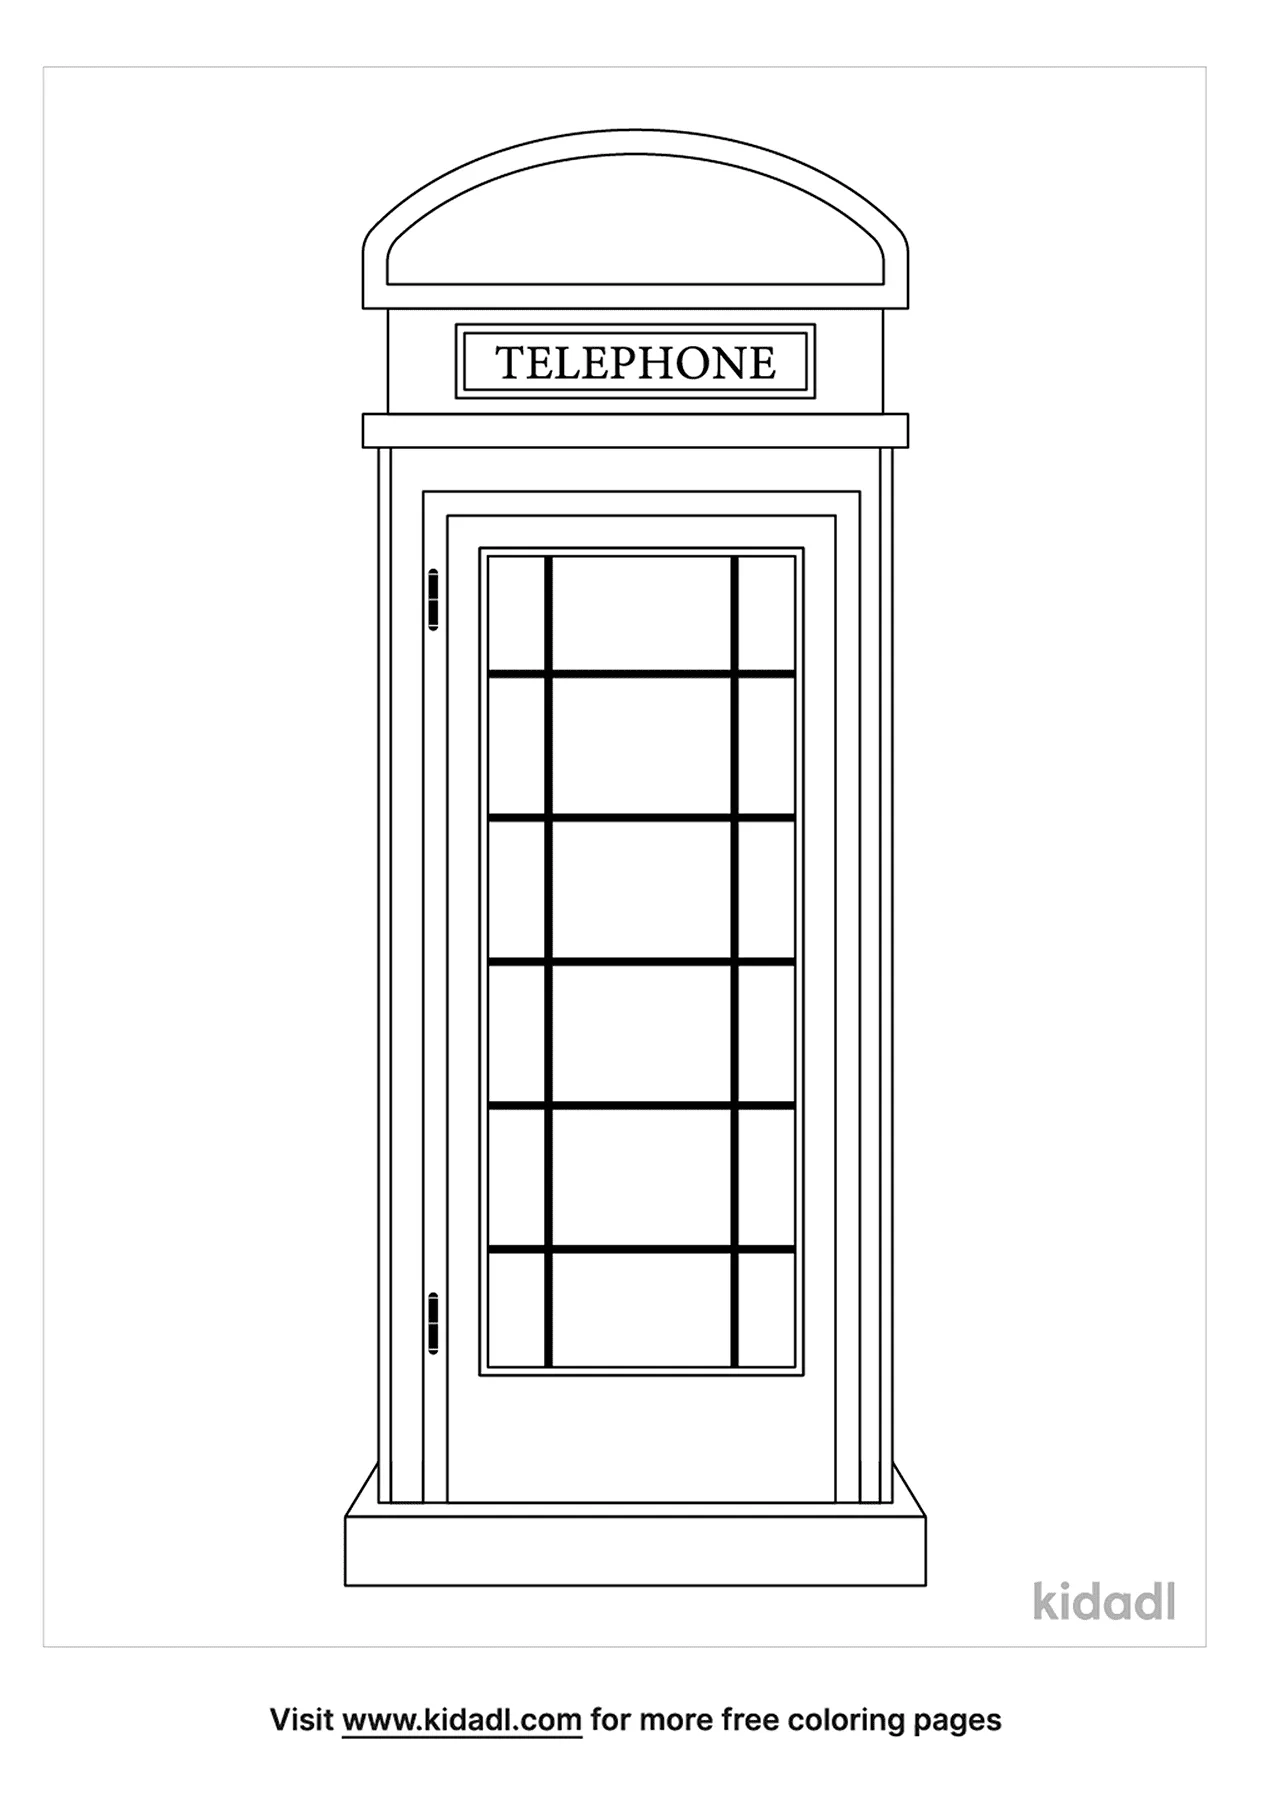 British Phone Booth Coloring Page